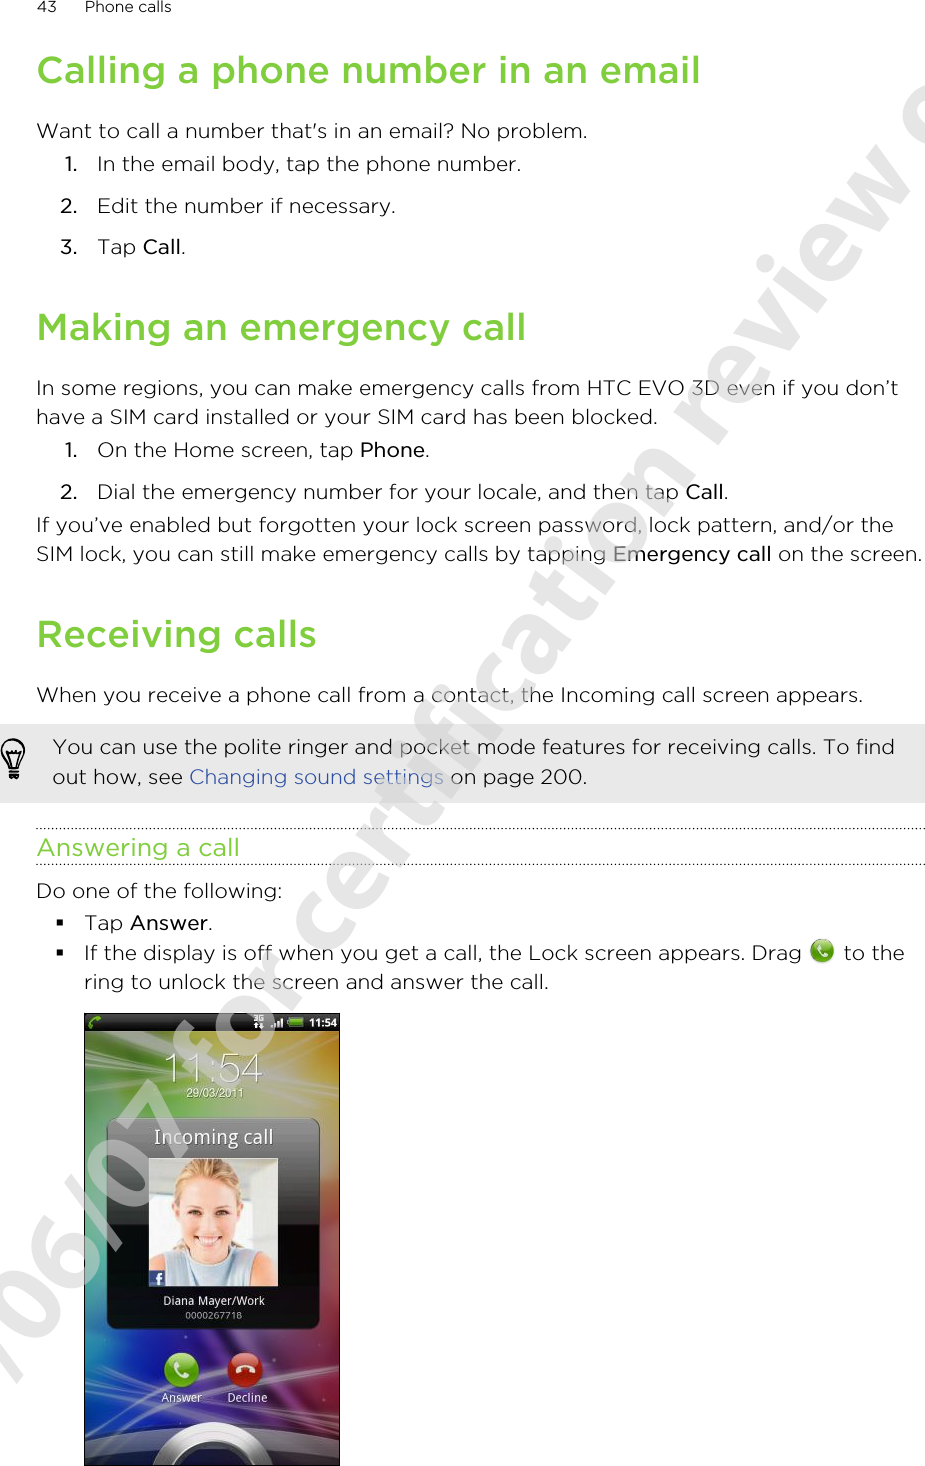 Calling a phone number in an emailWant to call a number that&apos;s in an email? No problem.1. In the email body, tap the phone number.2. Edit the number if necessary.3. Tap Call.Making an emergency callIn some regions, you can make emergency calls from HTC EVO 3D even if you don’thave a SIM card installed or your SIM card has been blocked.1. On the Home screen, tap Phone.2. Dial the emergency number for your locale, and then tap Call.If you’ve enabled but forgotten your lock screen password, lock pattern, and/or theSIM lock, you can still make emergency calls by tapping Emergency call on the screen.Receiving callsWhen you receive a phone call from a contact, the Incoming call screen appears.You can use the polite ringer and pocket mode features for receiving calls. To findout how, see Changing sound settings on page 200.Answering a callDo one of the following:§Tap Answer.§If the display is off when you get a call, the Lock screen appears. Drag   to thering to unlock the screen and answer the call.43 Phone calls2011/06/07 for certification review only